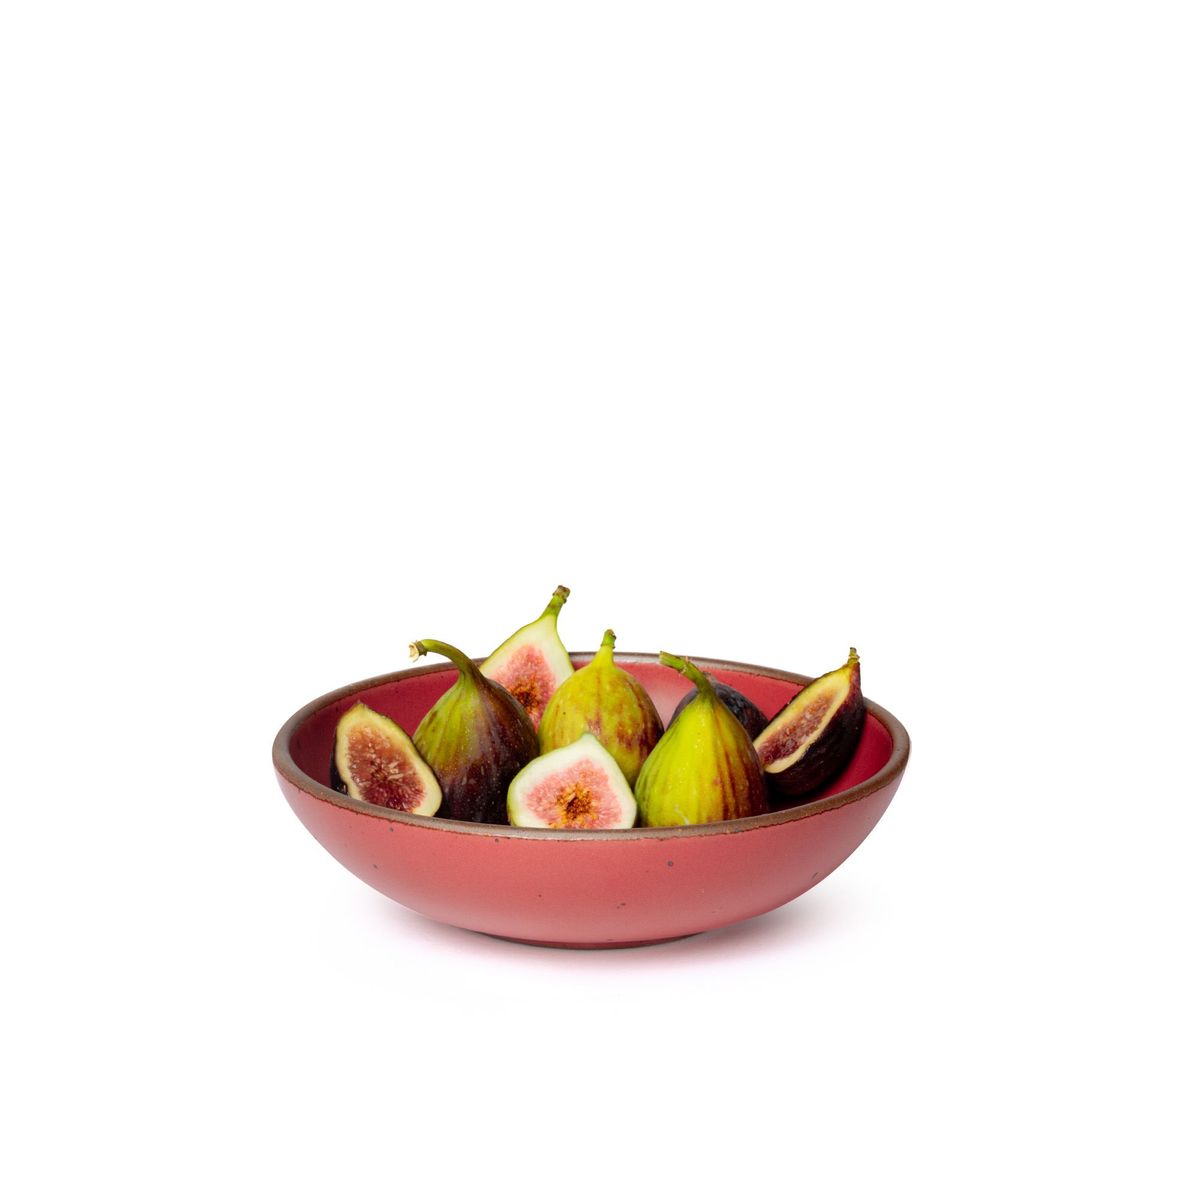 Figs in a dinner-sized shallow ceramic bowl in a bold red color featuring iron speckles and an unglazed rim